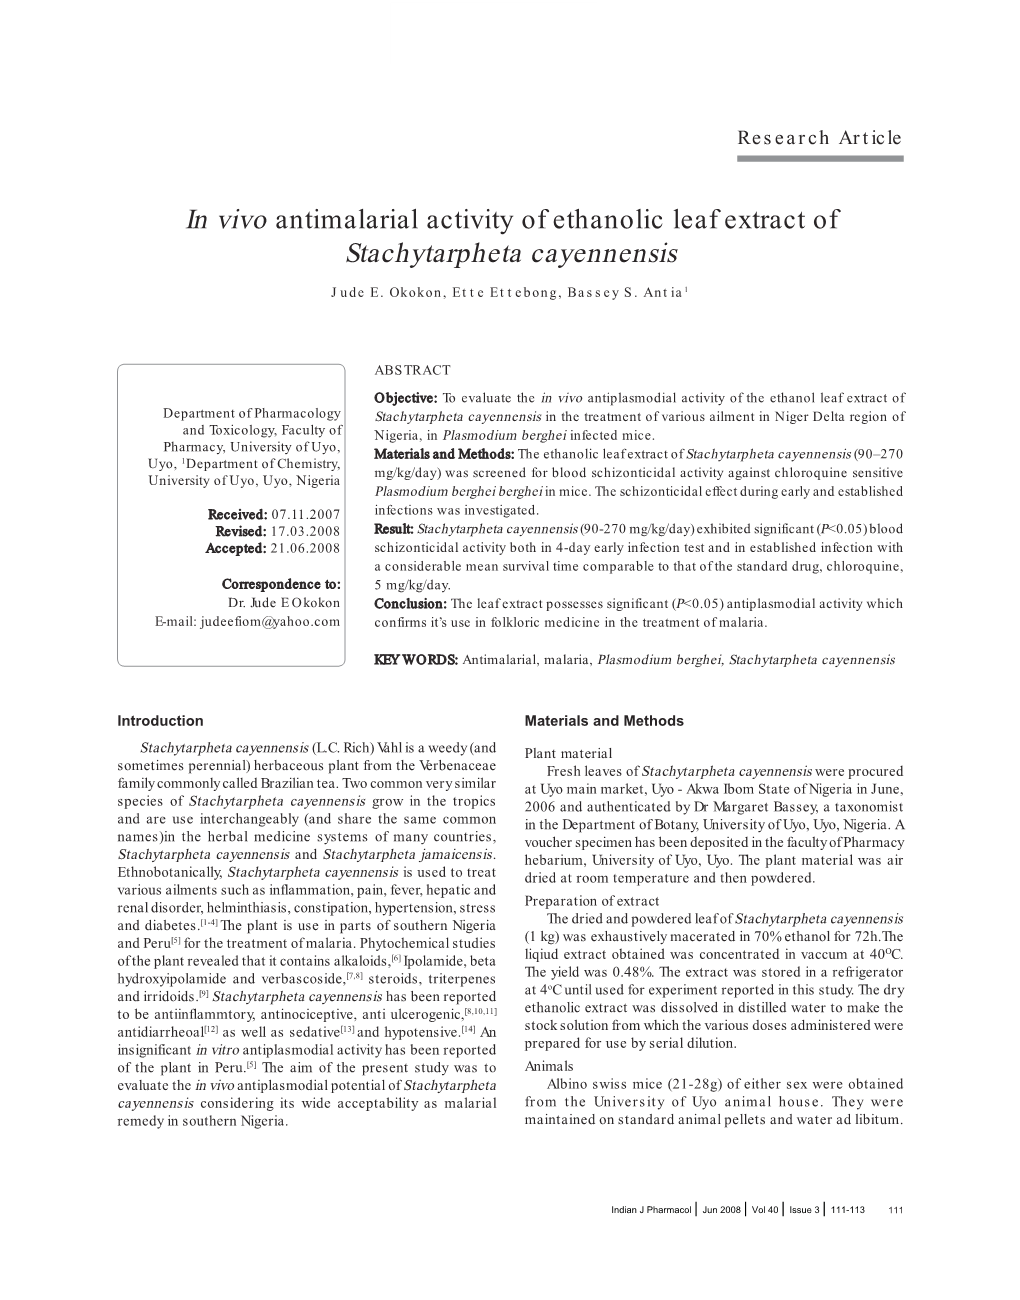 In Vivo Antimalarial Activity of Ethanolic Leaf Extract of Stachytarpheta Cayennensis Jude E